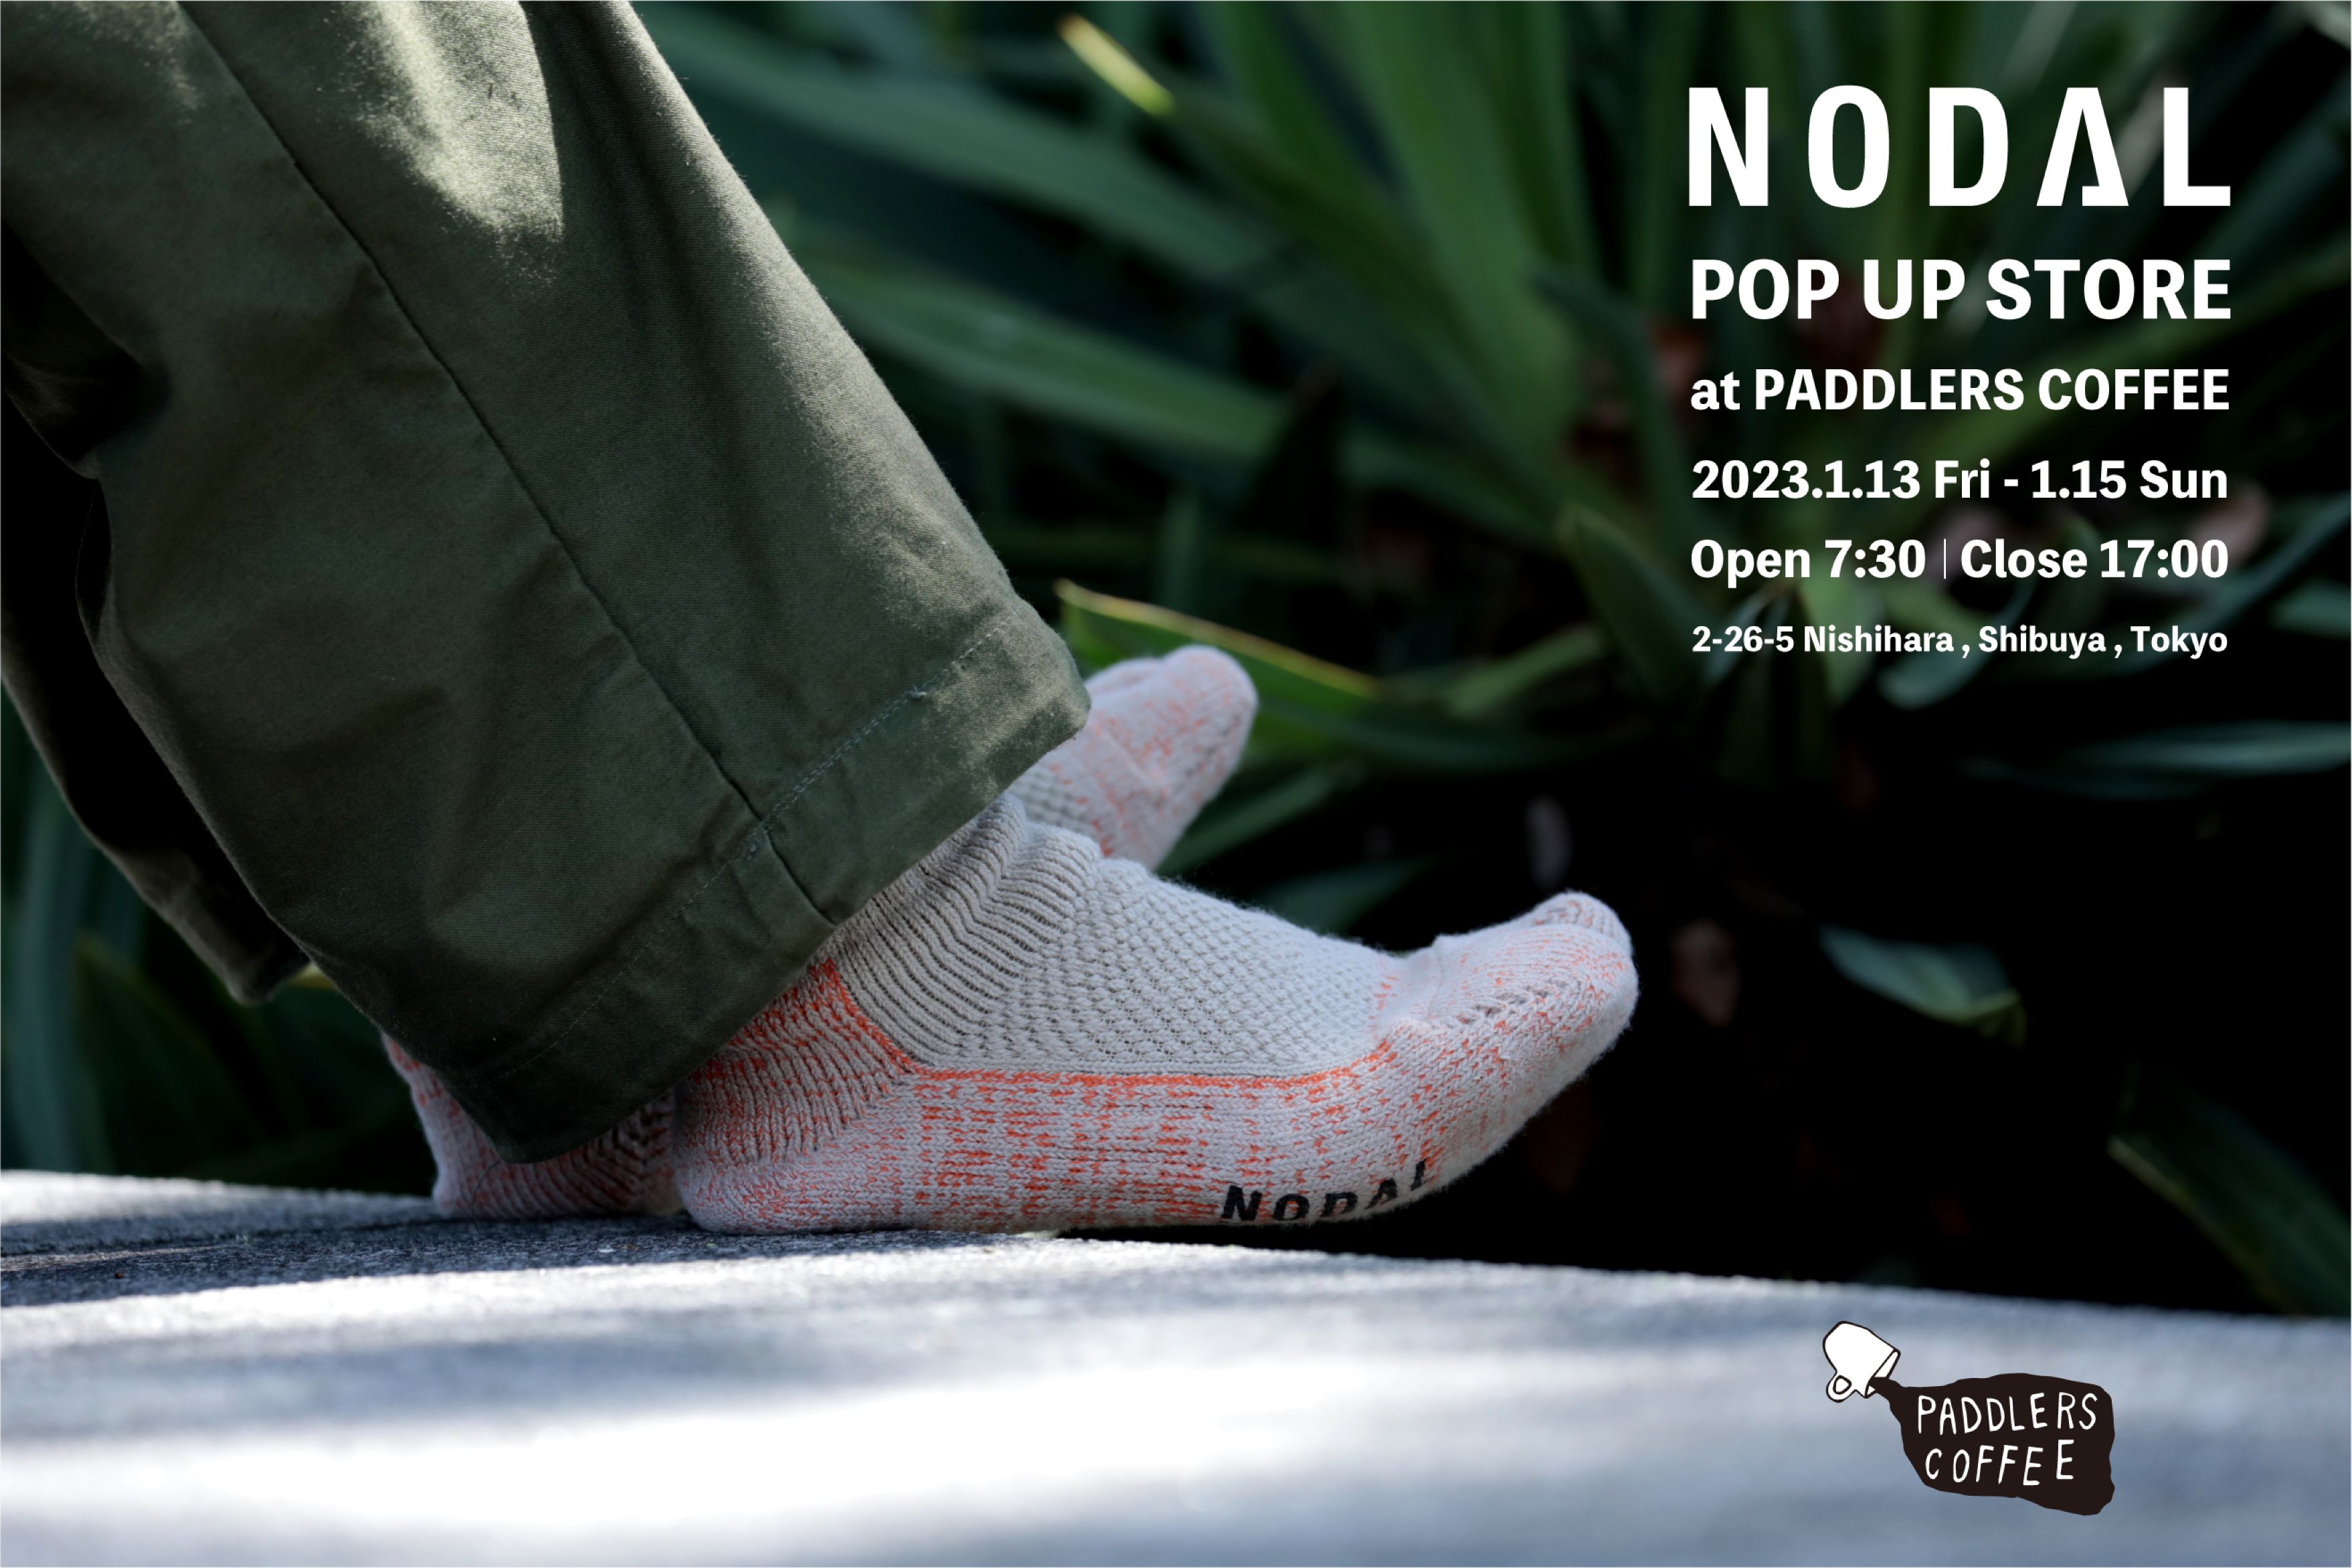 ■NODAL POPUP STORE at PADDLERS COFFEE■